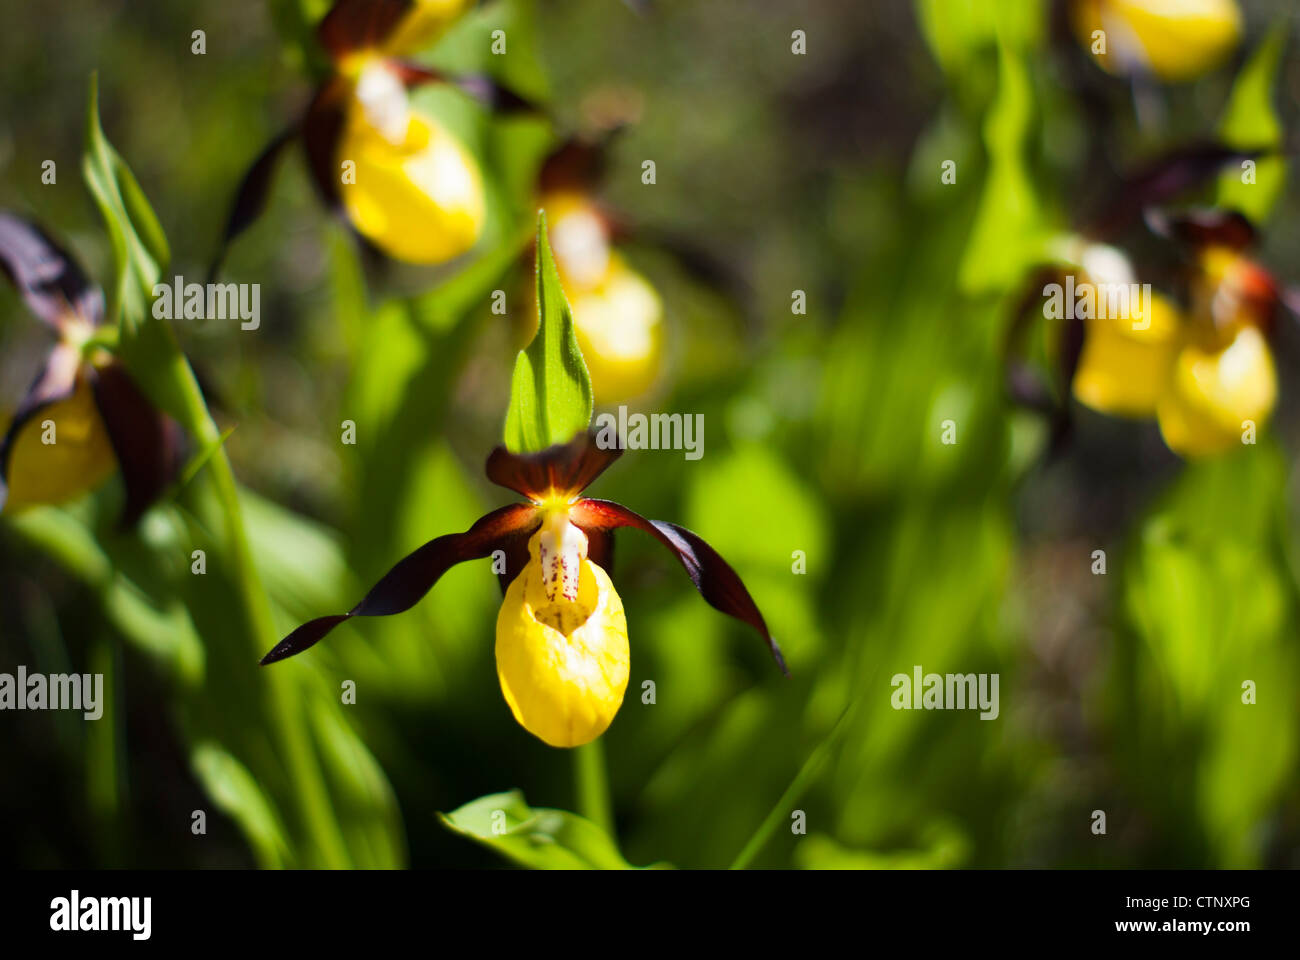 Lady's Slipper Orchid growing wild Banque D'Images